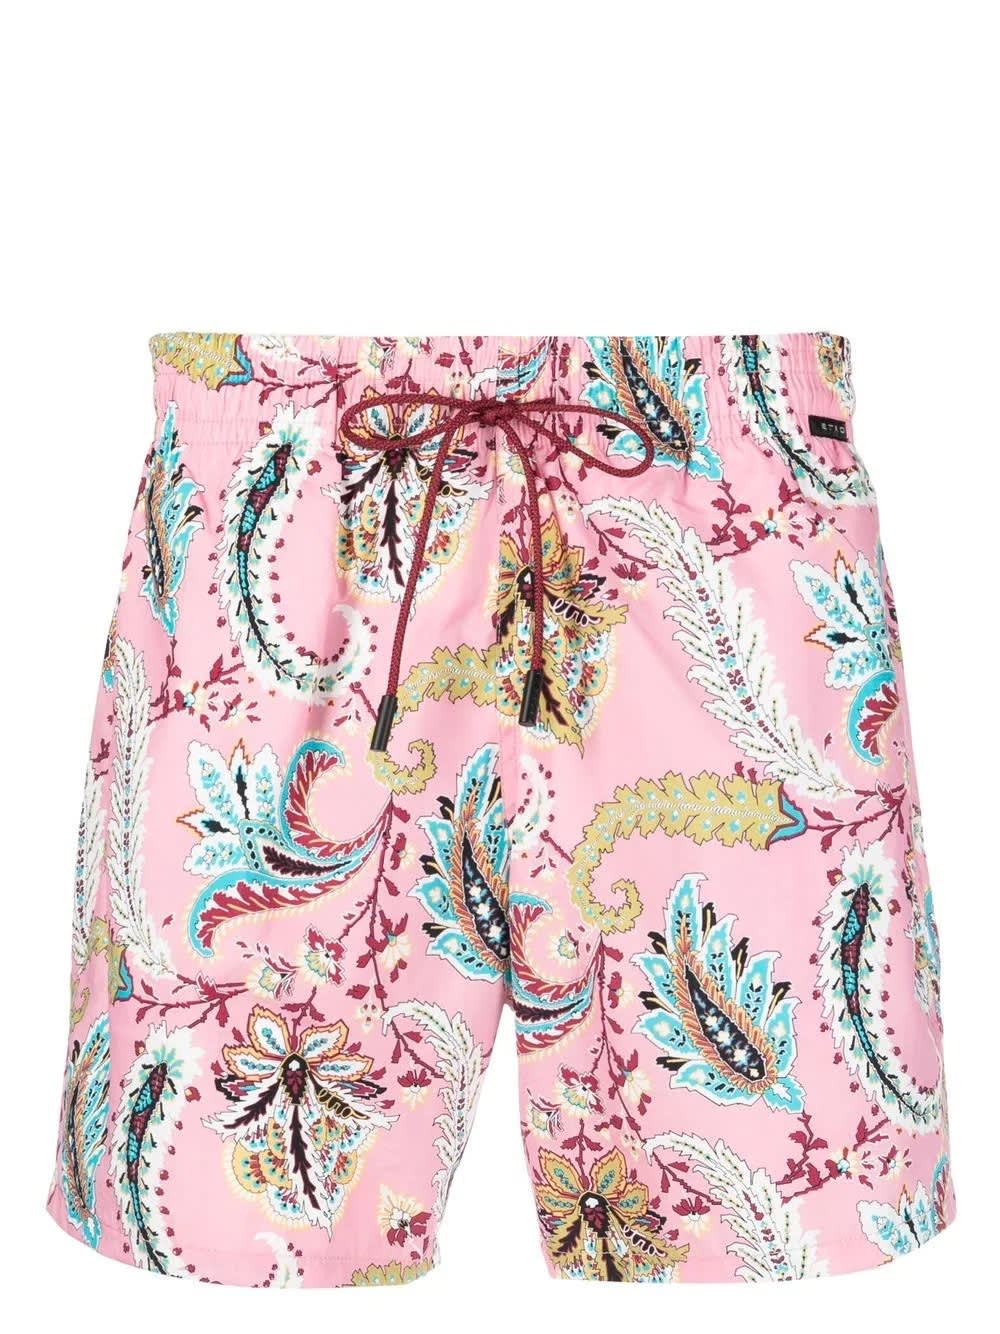 ETRO PINK SWIM SHORTS WITH FLORAL PAISLEY PRINT